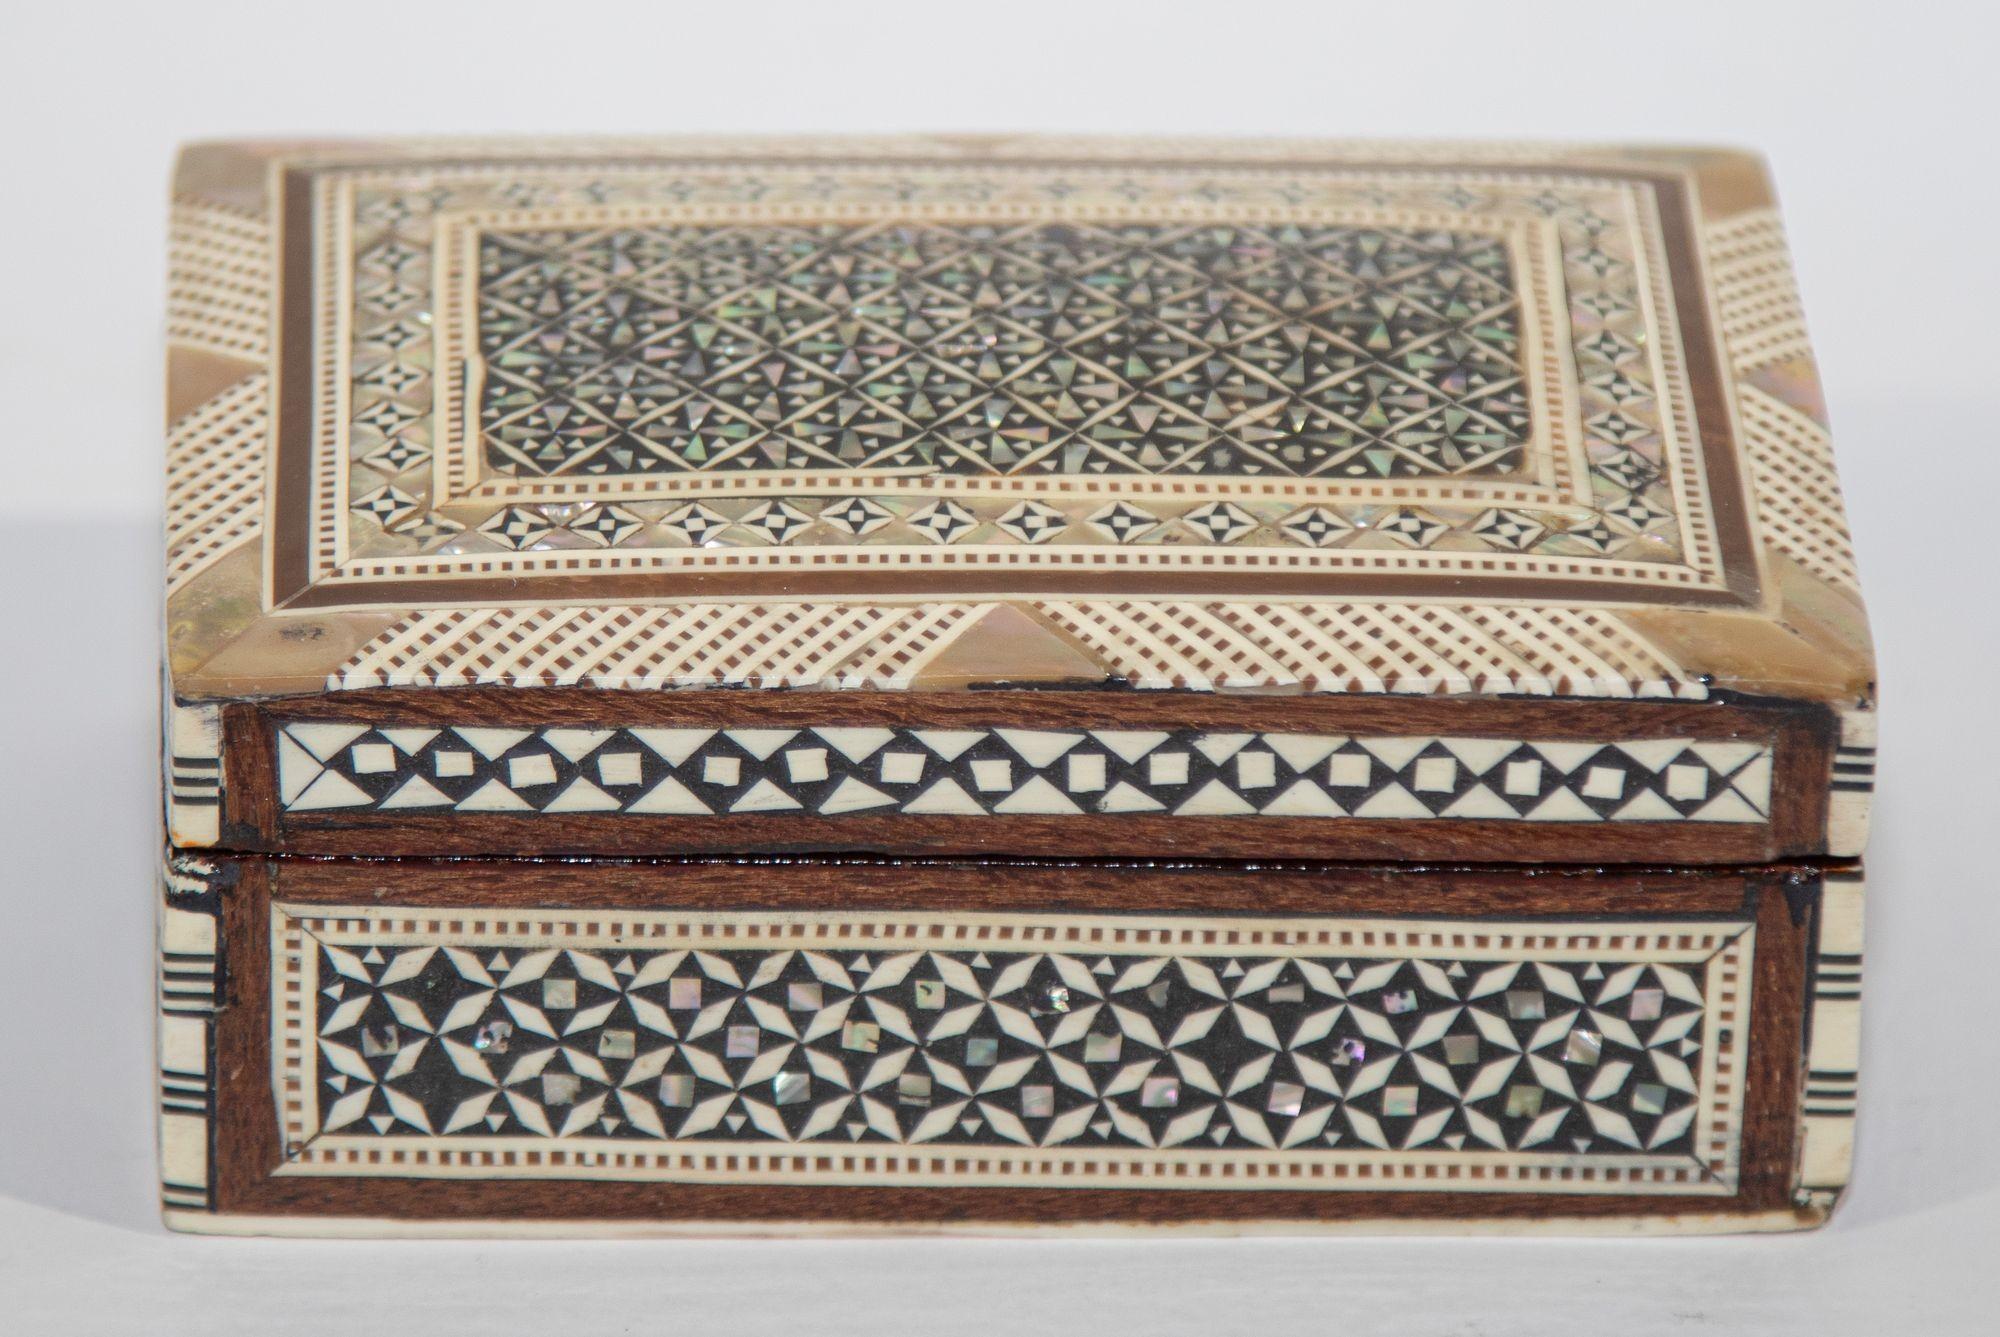 Middle Eastern Mosaic Wood Box with Inlays of Mother of Pearl, C. 1950s For Sale 3